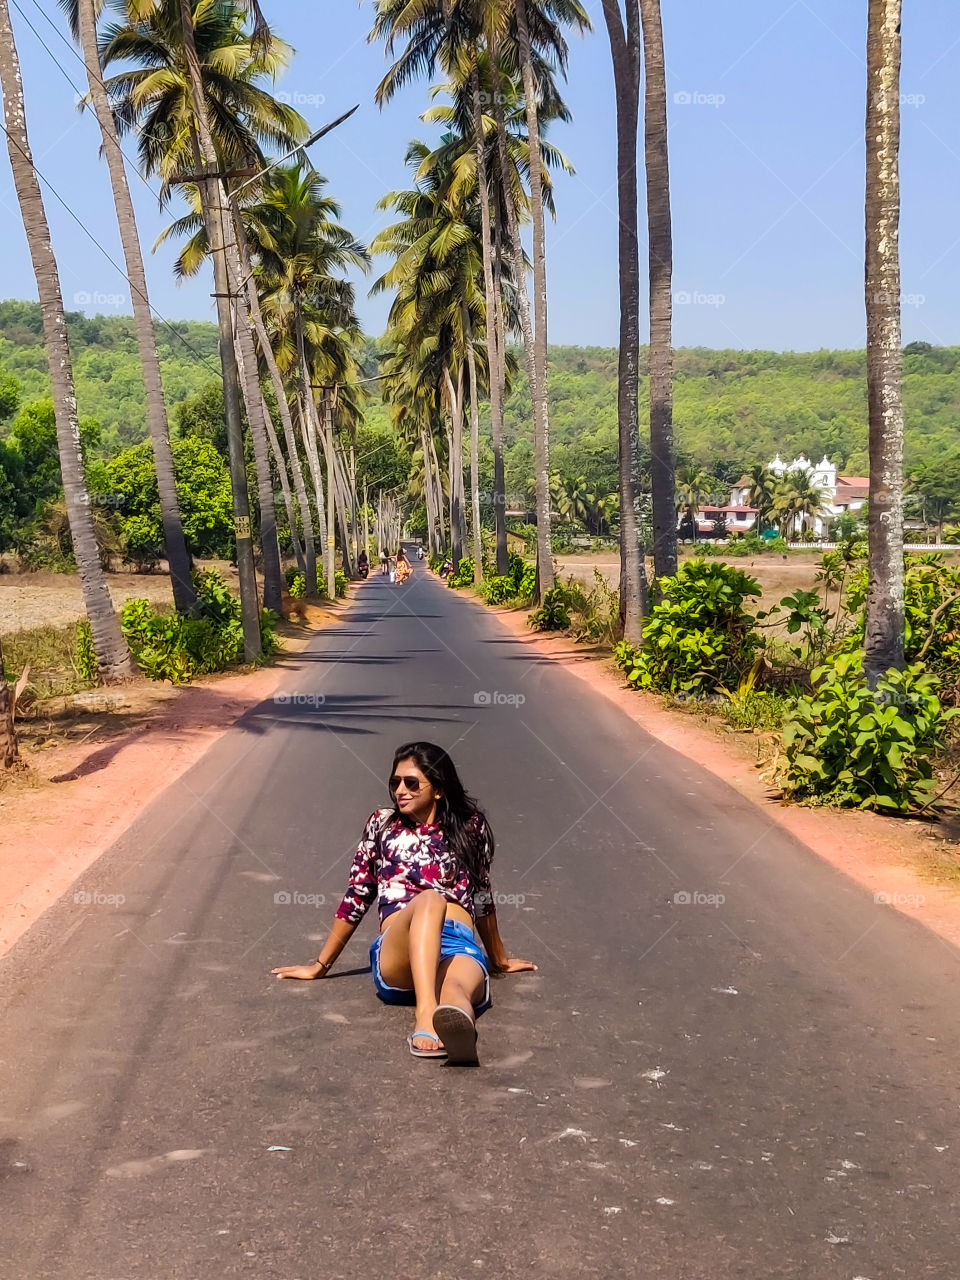 young woman sitting on the middle of the road during her vacation in summer with beautiful palm trees both sides of the road